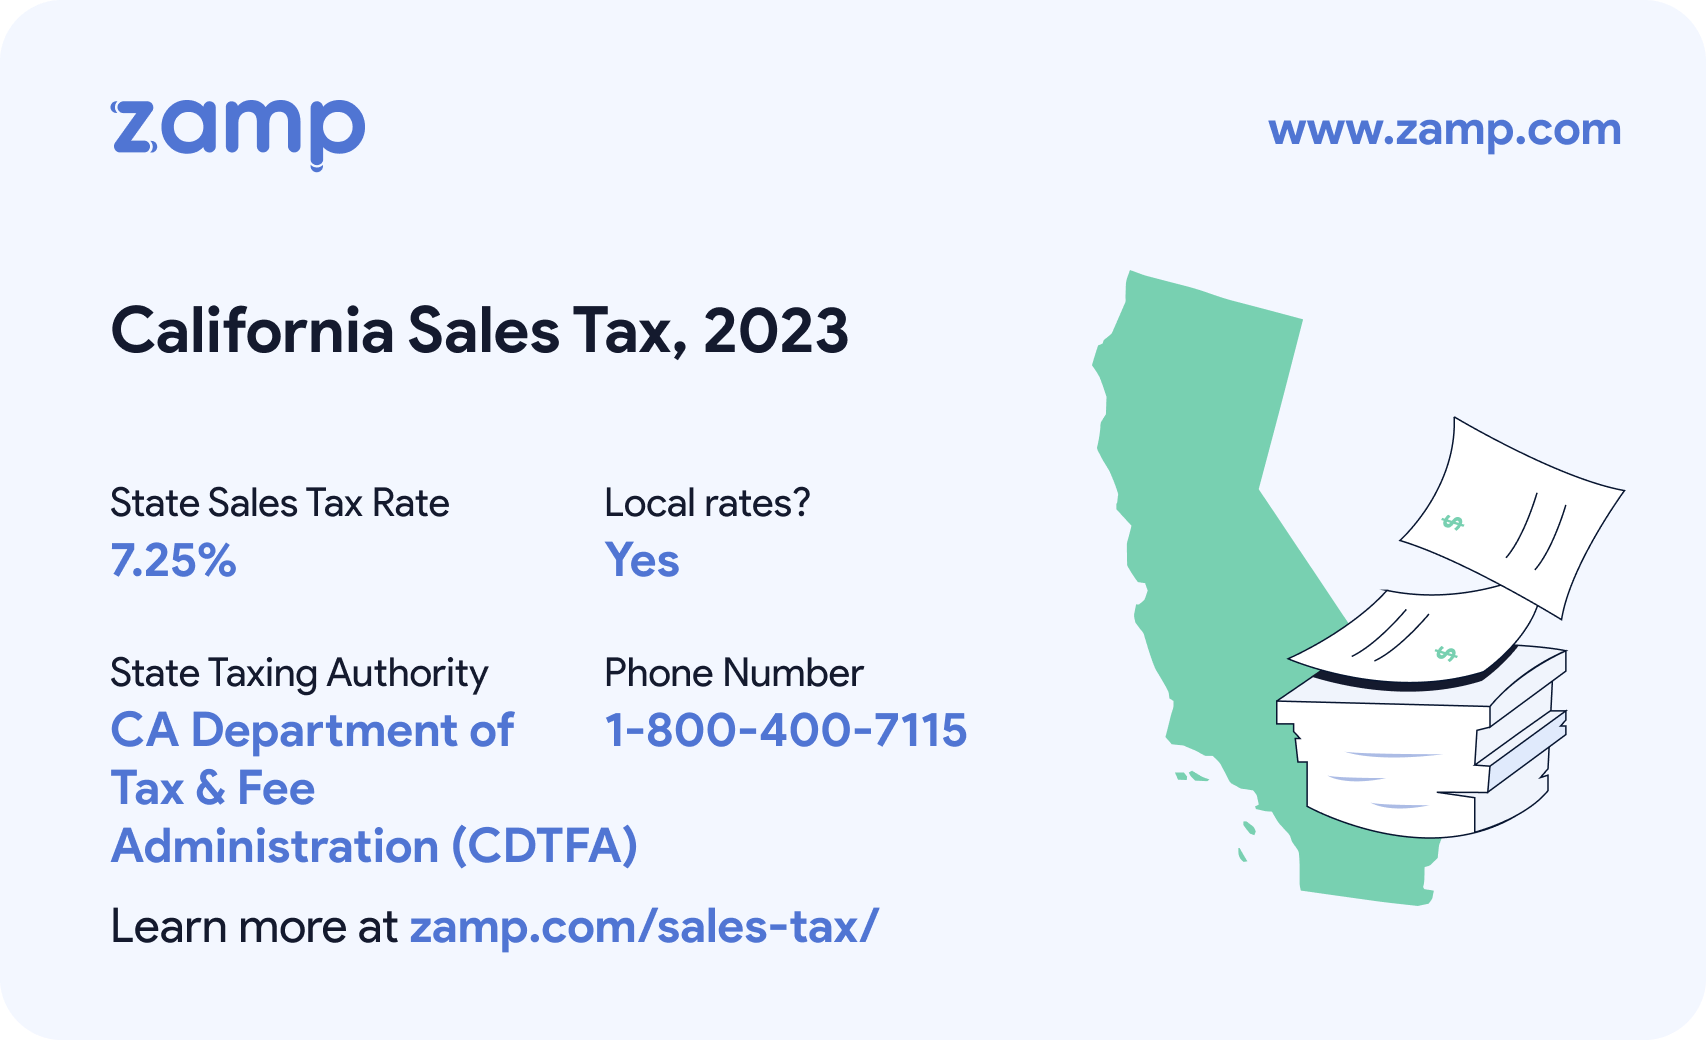 California basic sales tax info for 2023 - State sales tax rate: 7.25%, Local rates? Yes; State Taxing Authority: California Department of Tax and Fee Administration; and phone number 1-800-400-7115